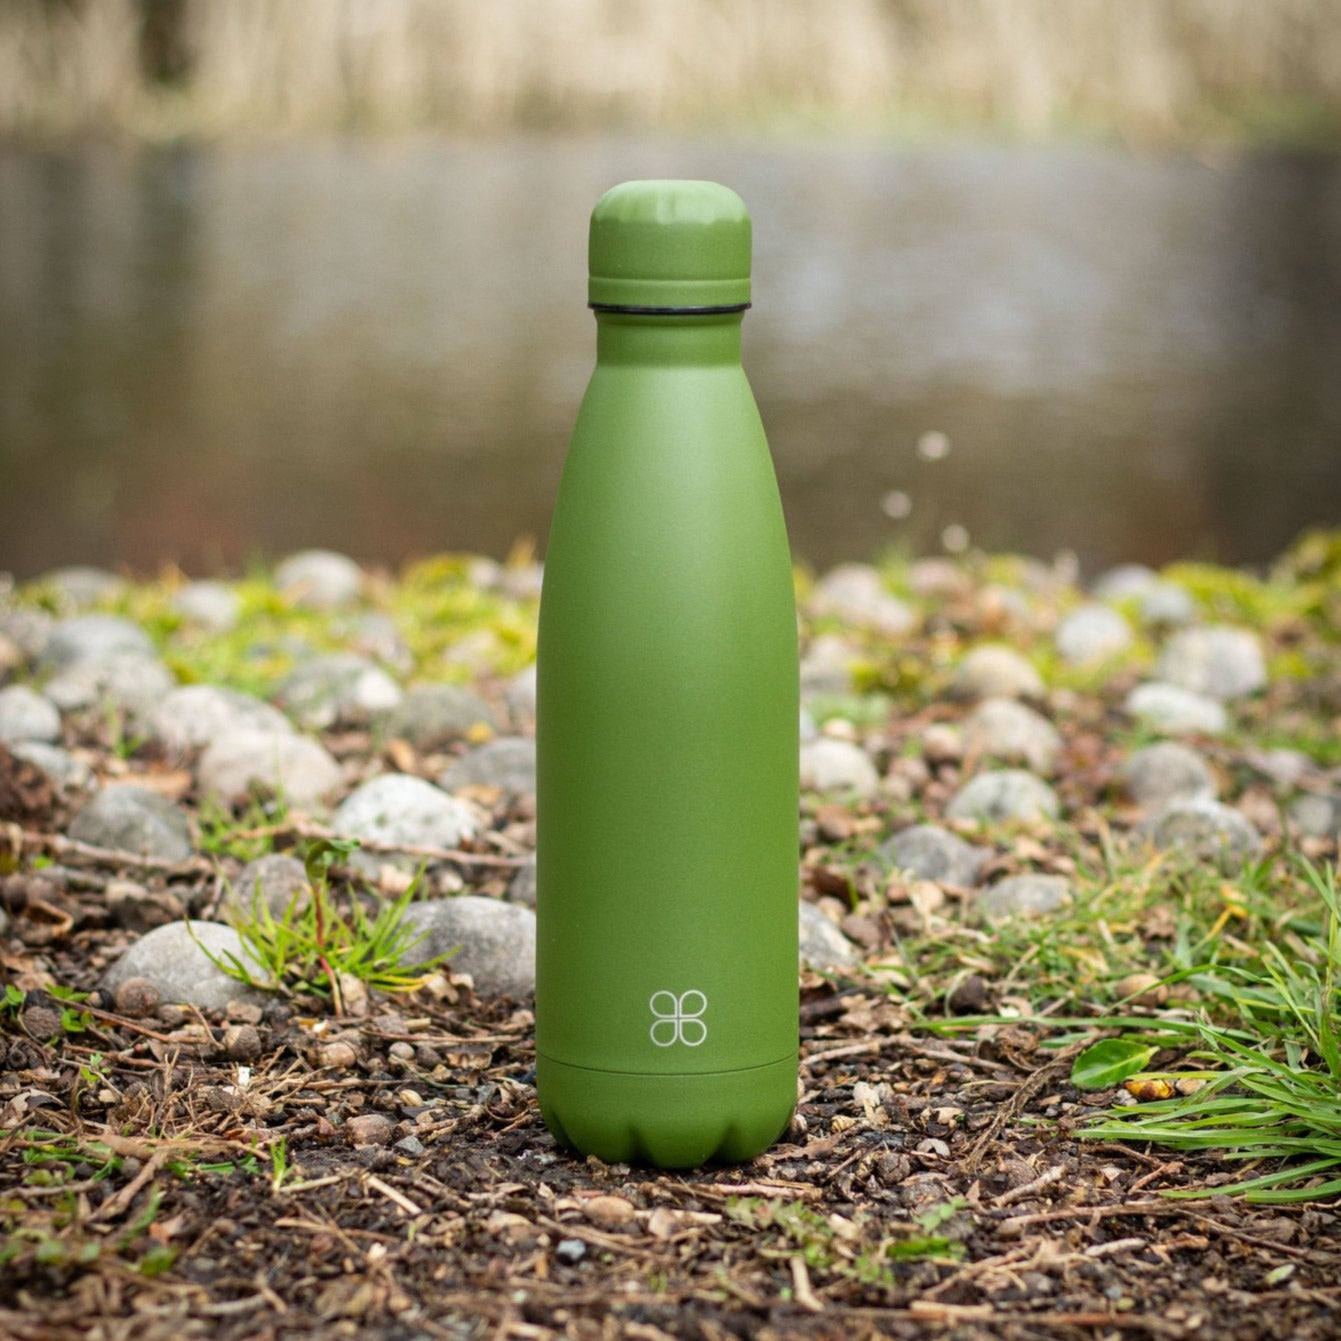 DRINCO® 22oz Stainless Steel Reusable Water Bottle - Forest Green –  TheGreenLivingShop